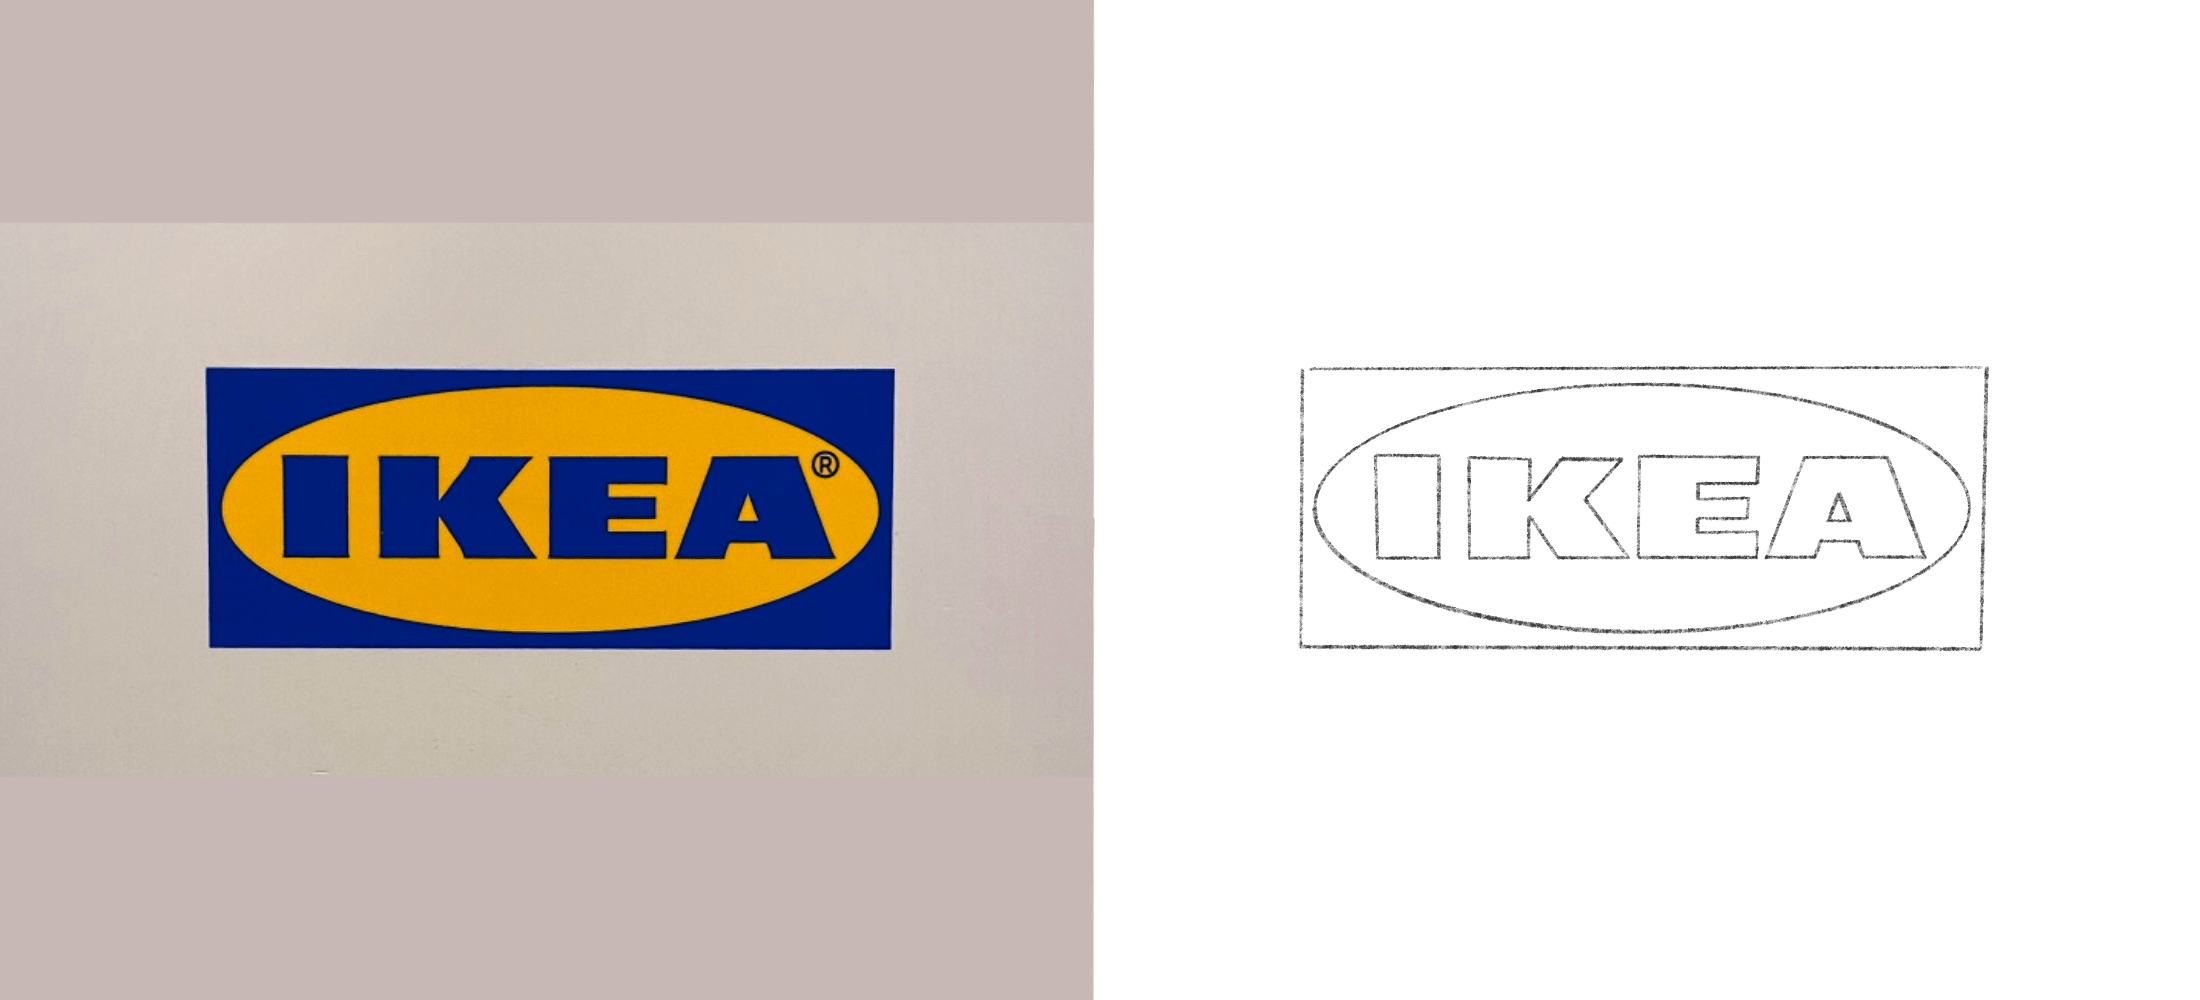 Ikea logo attached to a wall alongside a drawn version of the Ikea logo